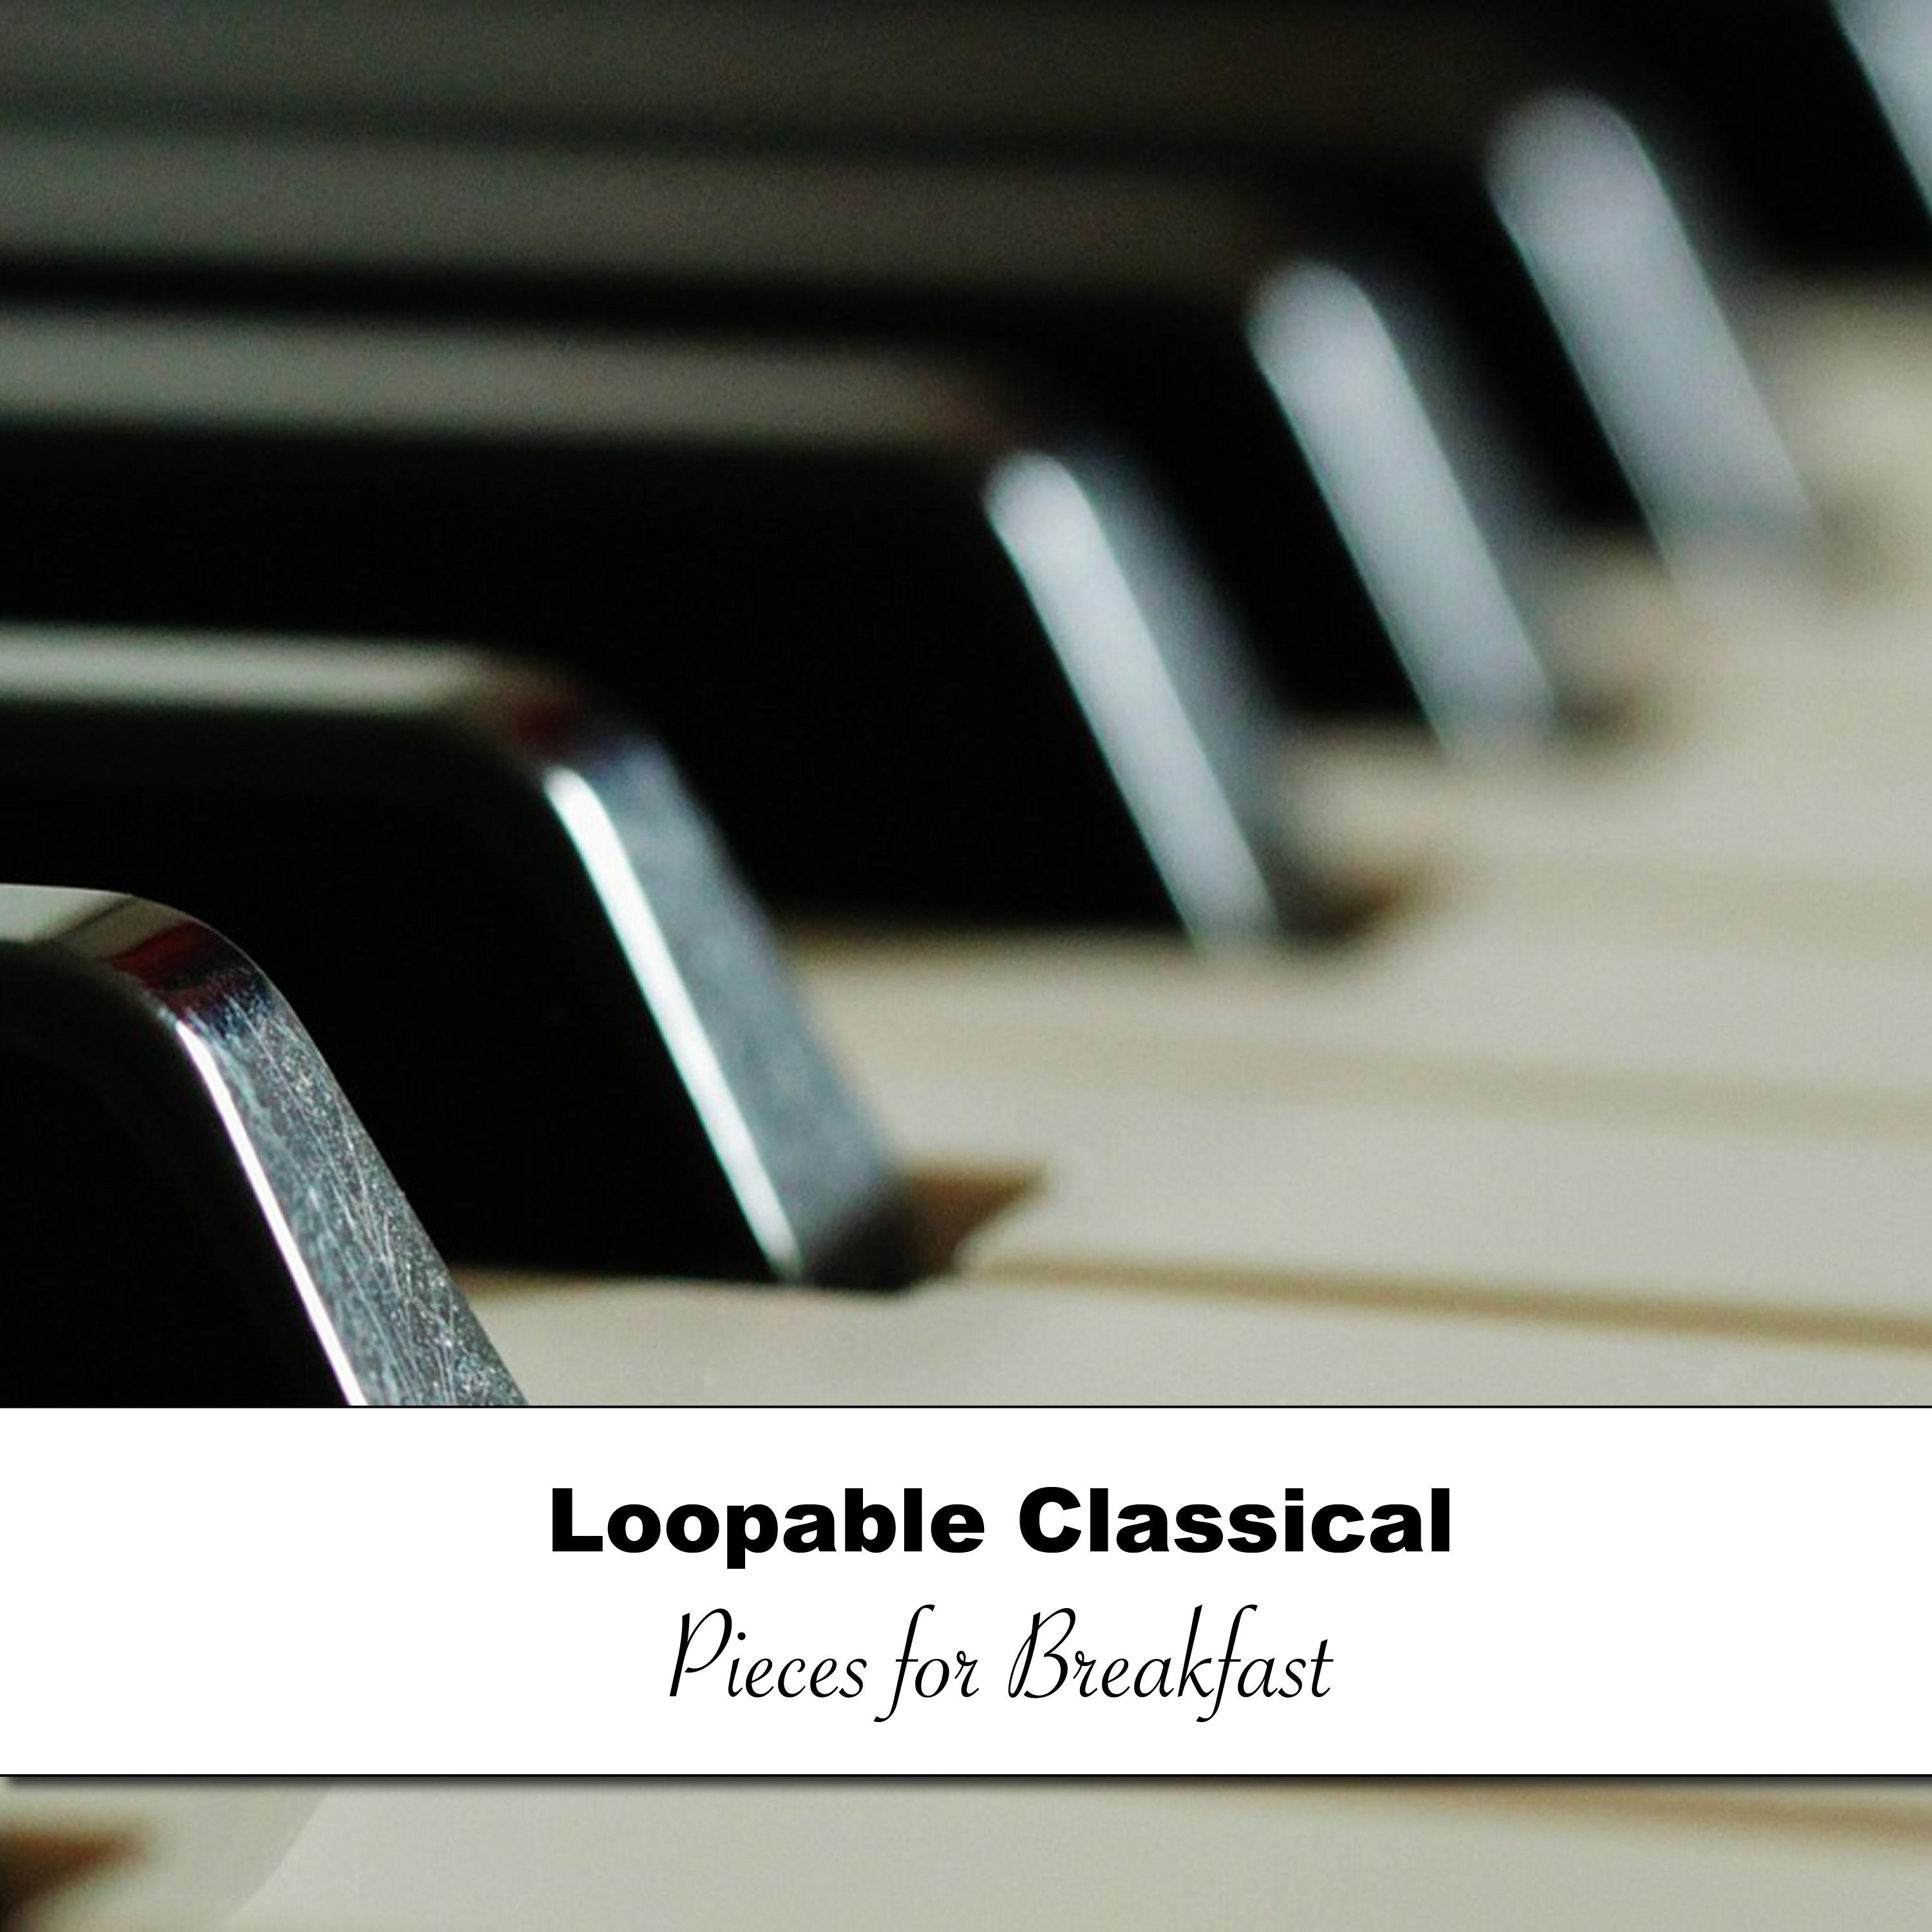 20 Loopable Classical Pieces for Breakfast